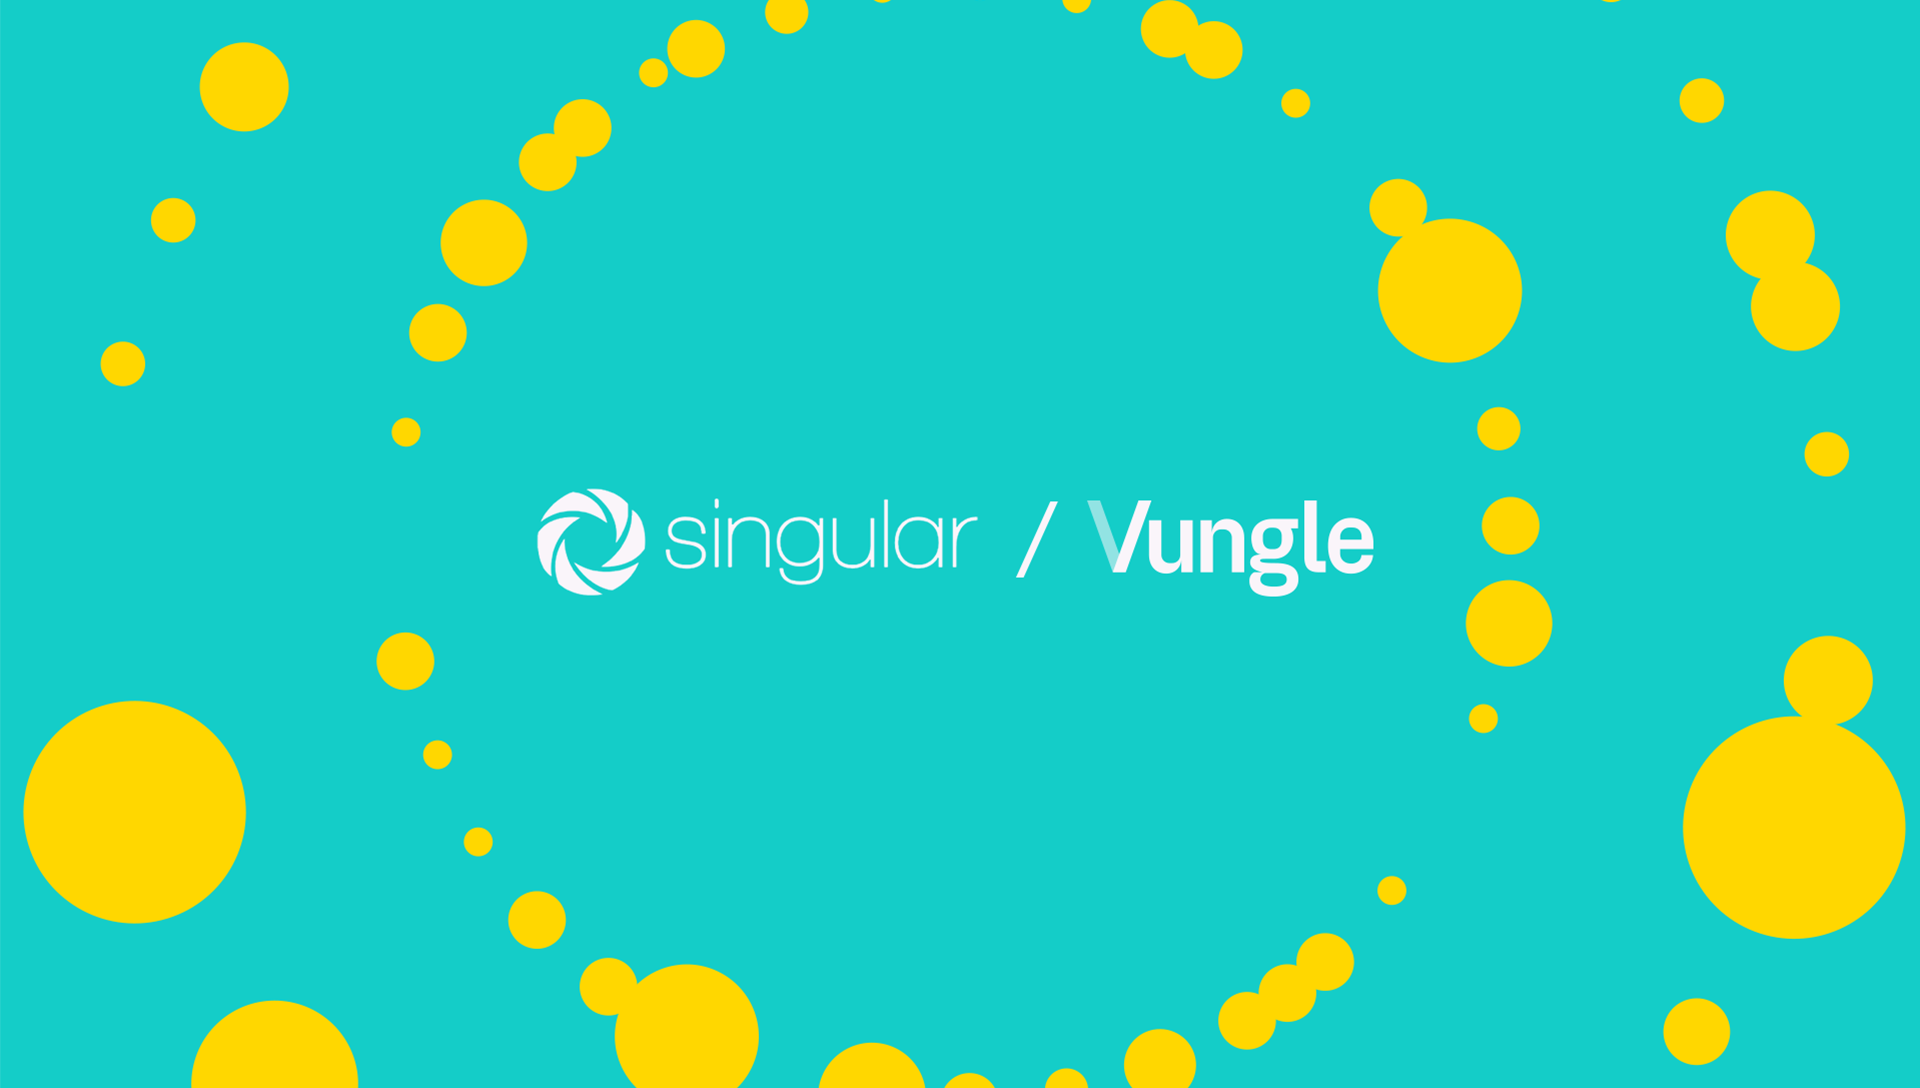 Vungle Ranks High for Third Year in a Row in Singular’s ROI Index 2020